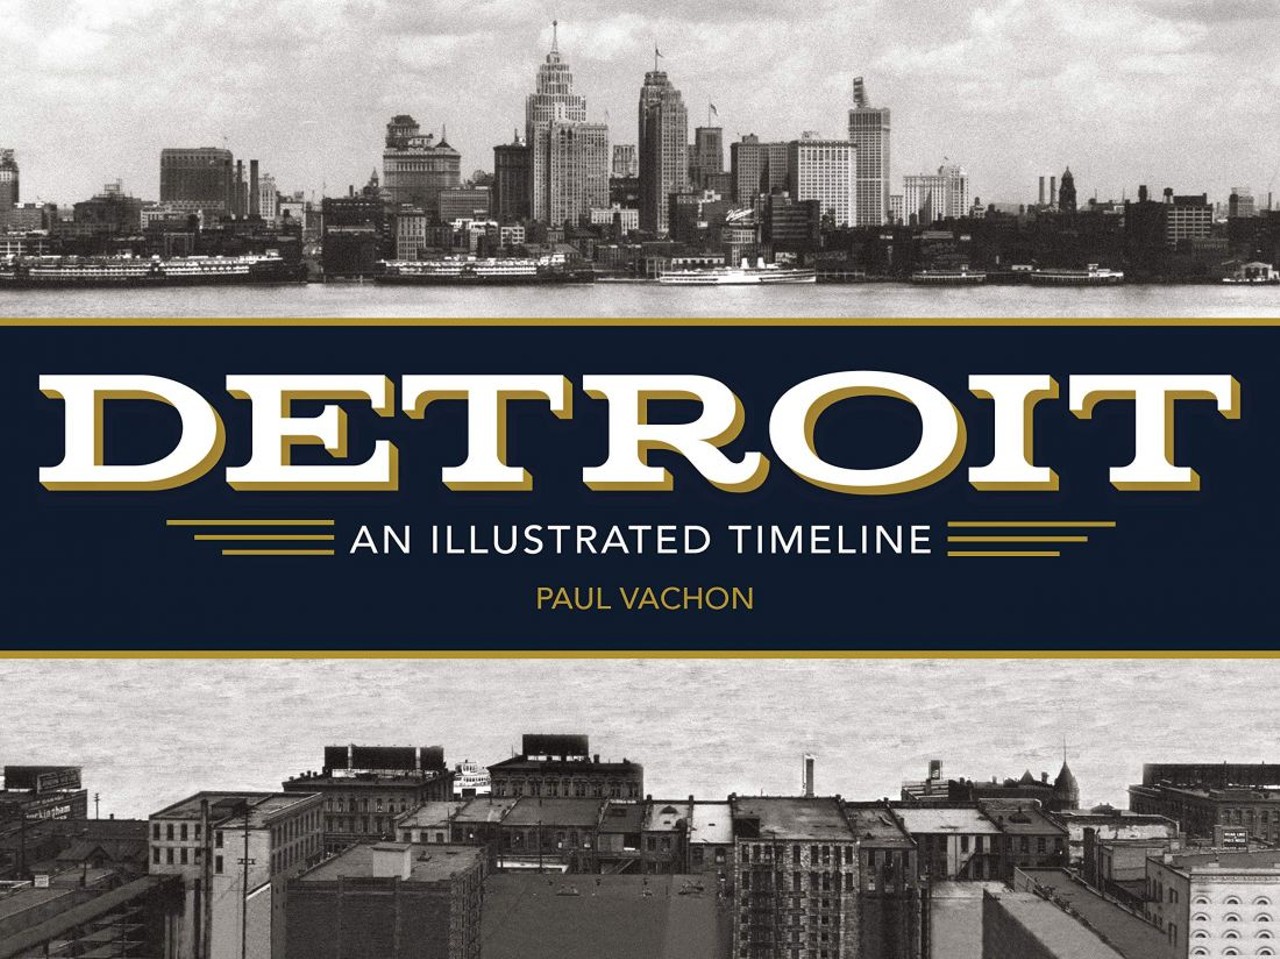 Detroit: An Illustrated Timeline
Walk through three centuries of Detroit history with author Paul Vachon in this aesthetically pleasing illustrated timeline. From the First French missionaries to the Battle of Bloody Run to the Riot of 1943 to the Super Bowl XL at Ford Field, the book has the breadth and depth to leave Detroiters more aware of their city&#146;s history than before.